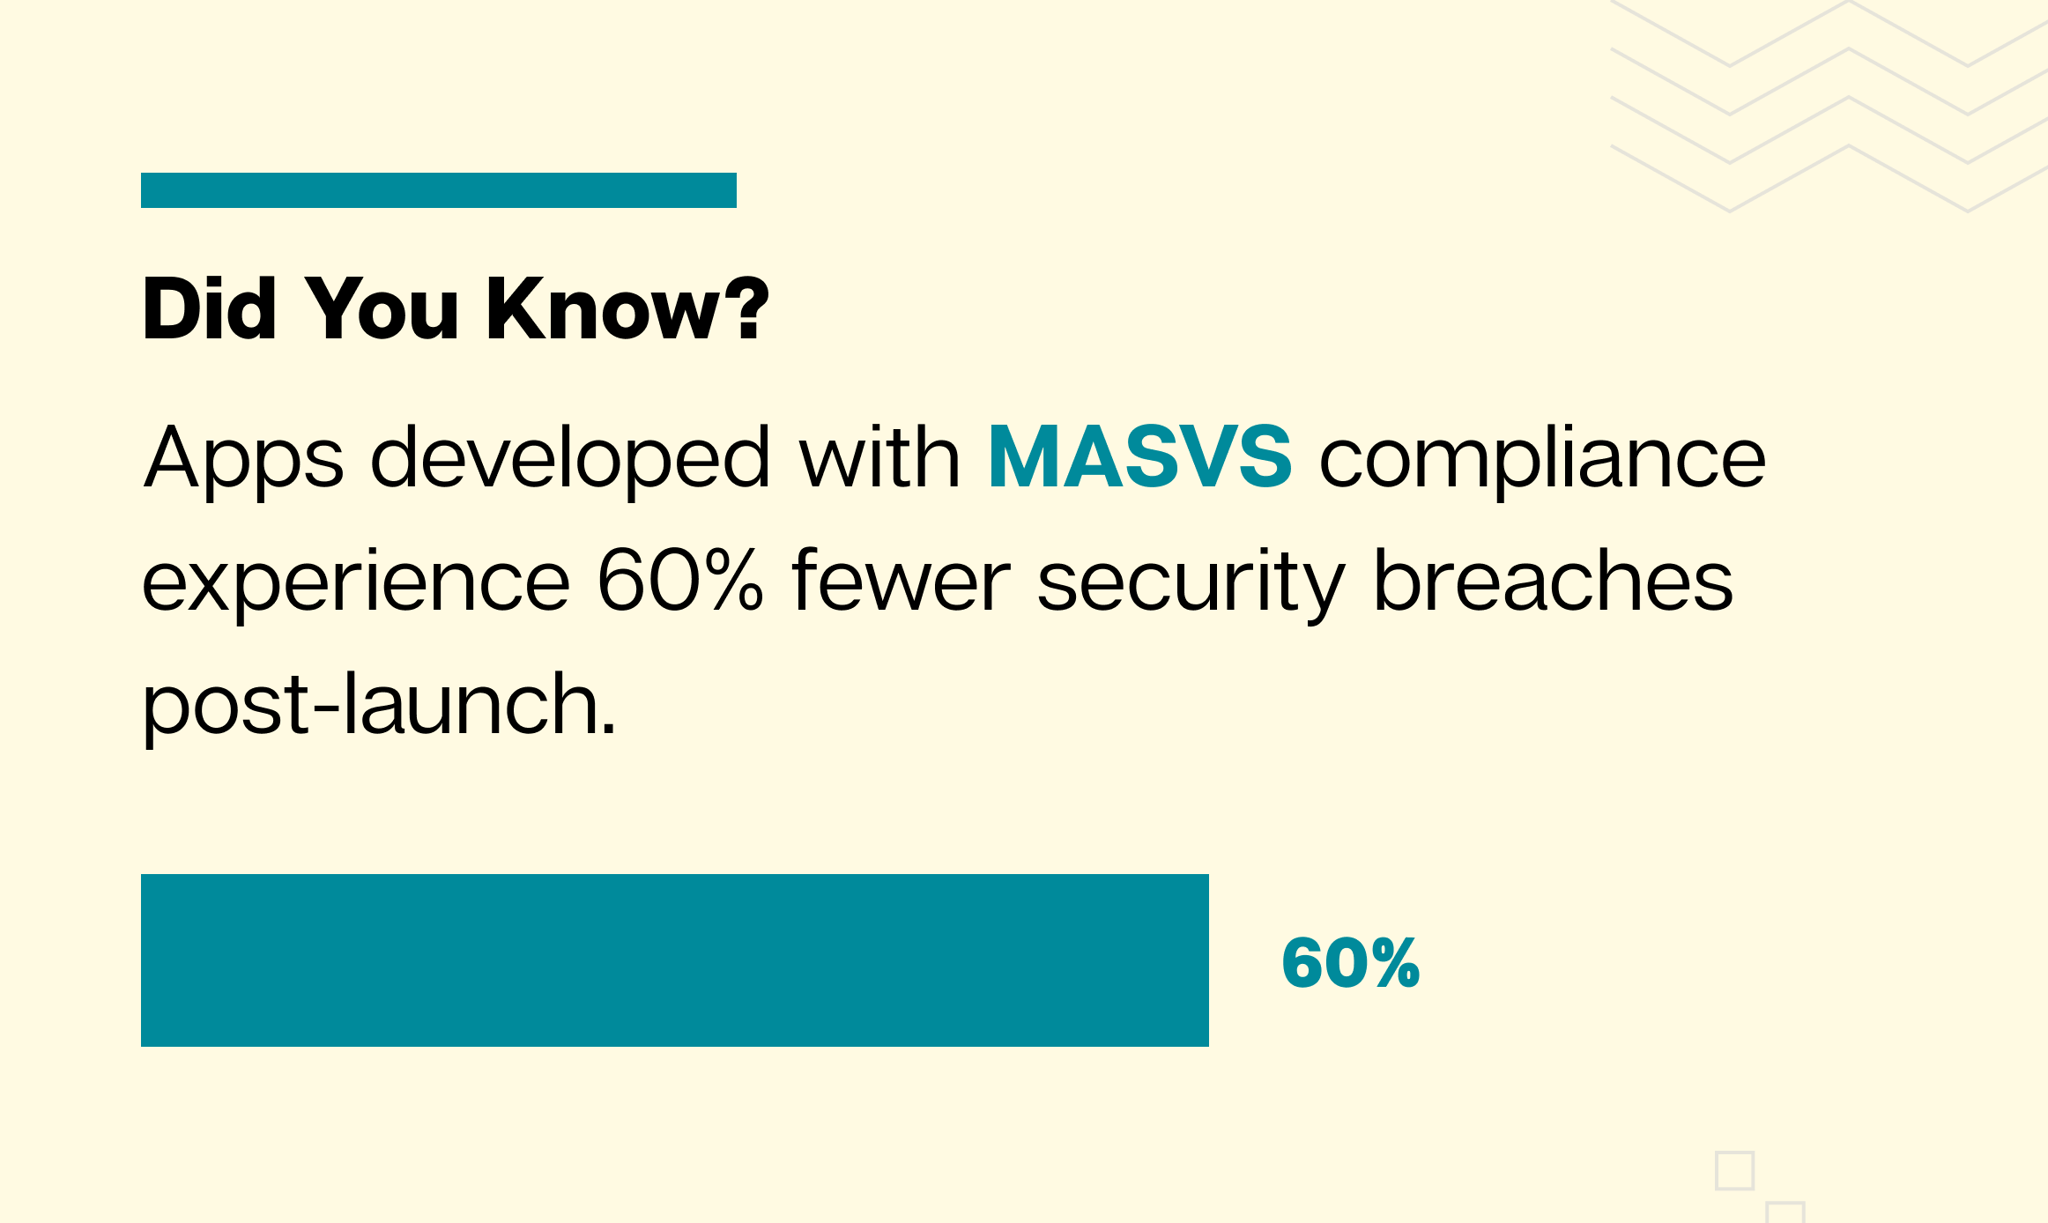 Apps developed with MASVS compliance have 60% fewer cyber threats - OWASP Mobile Application Security